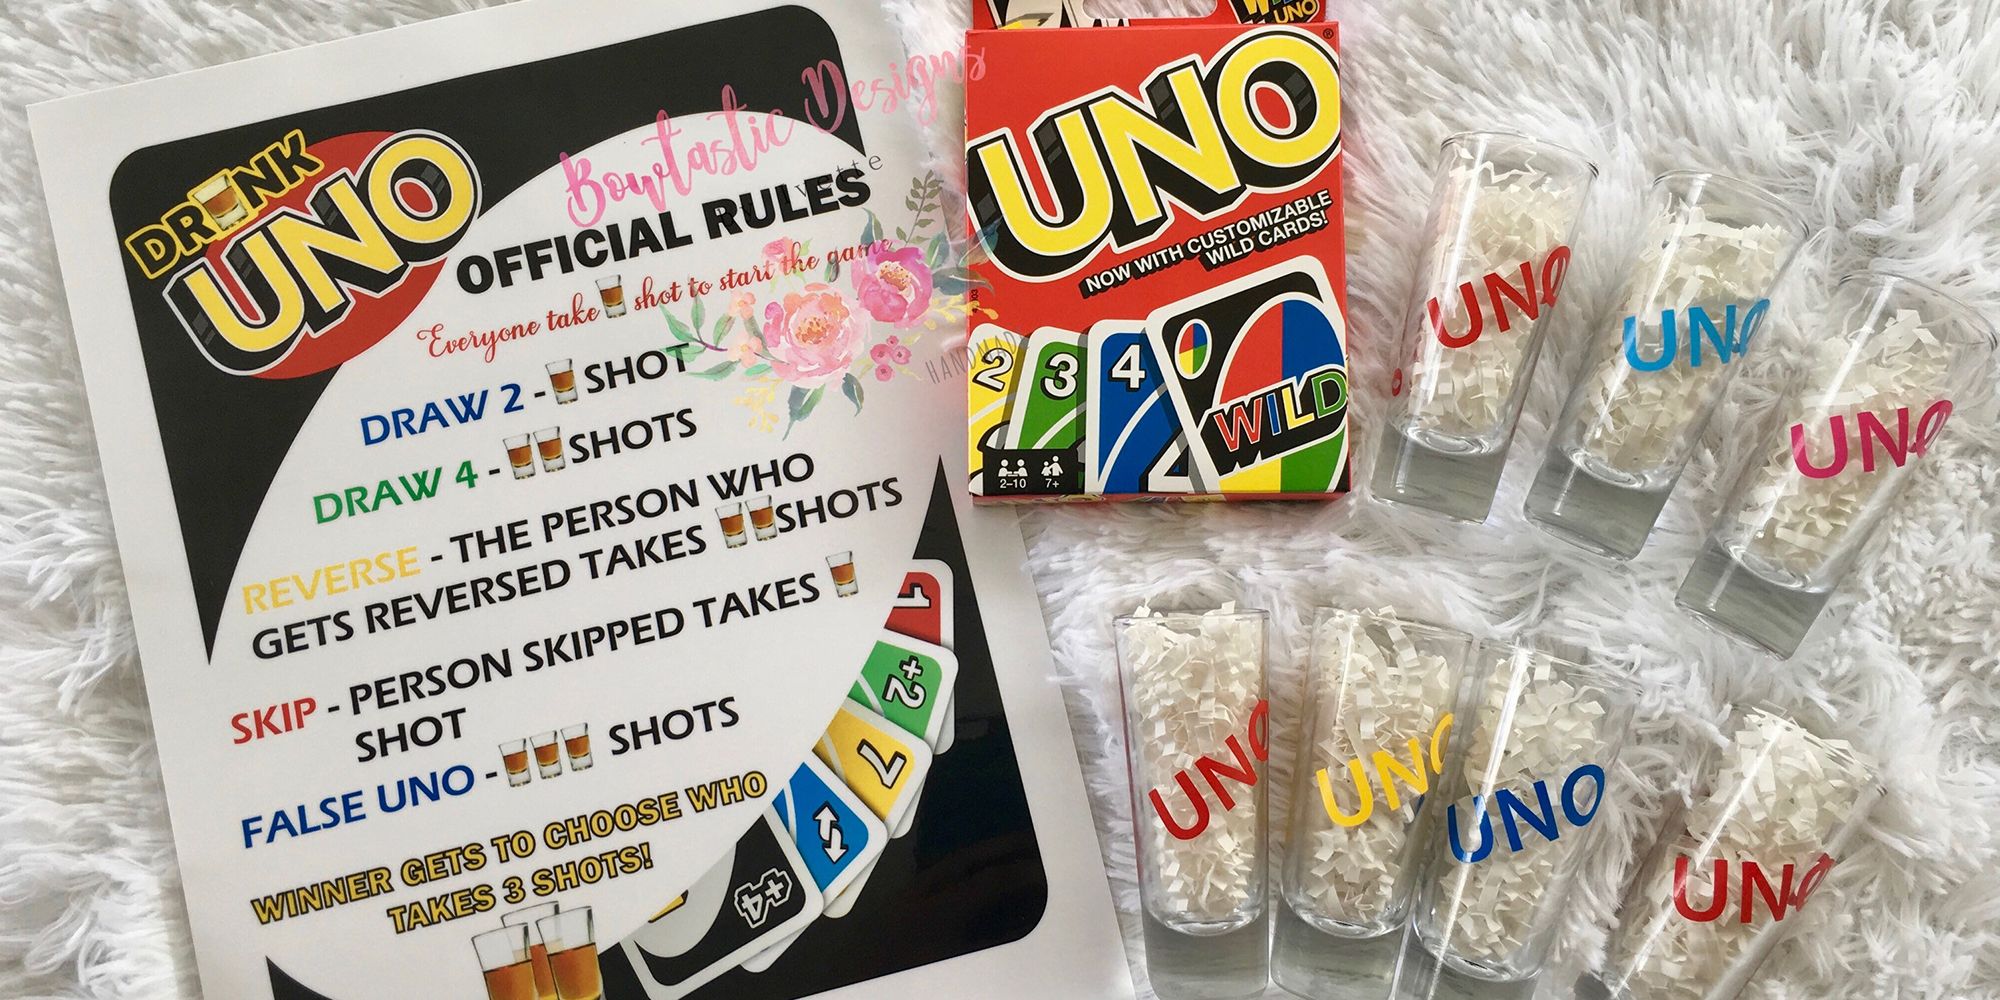 Drinking game Drunk Uno For Adult Uno Drinking Game-white